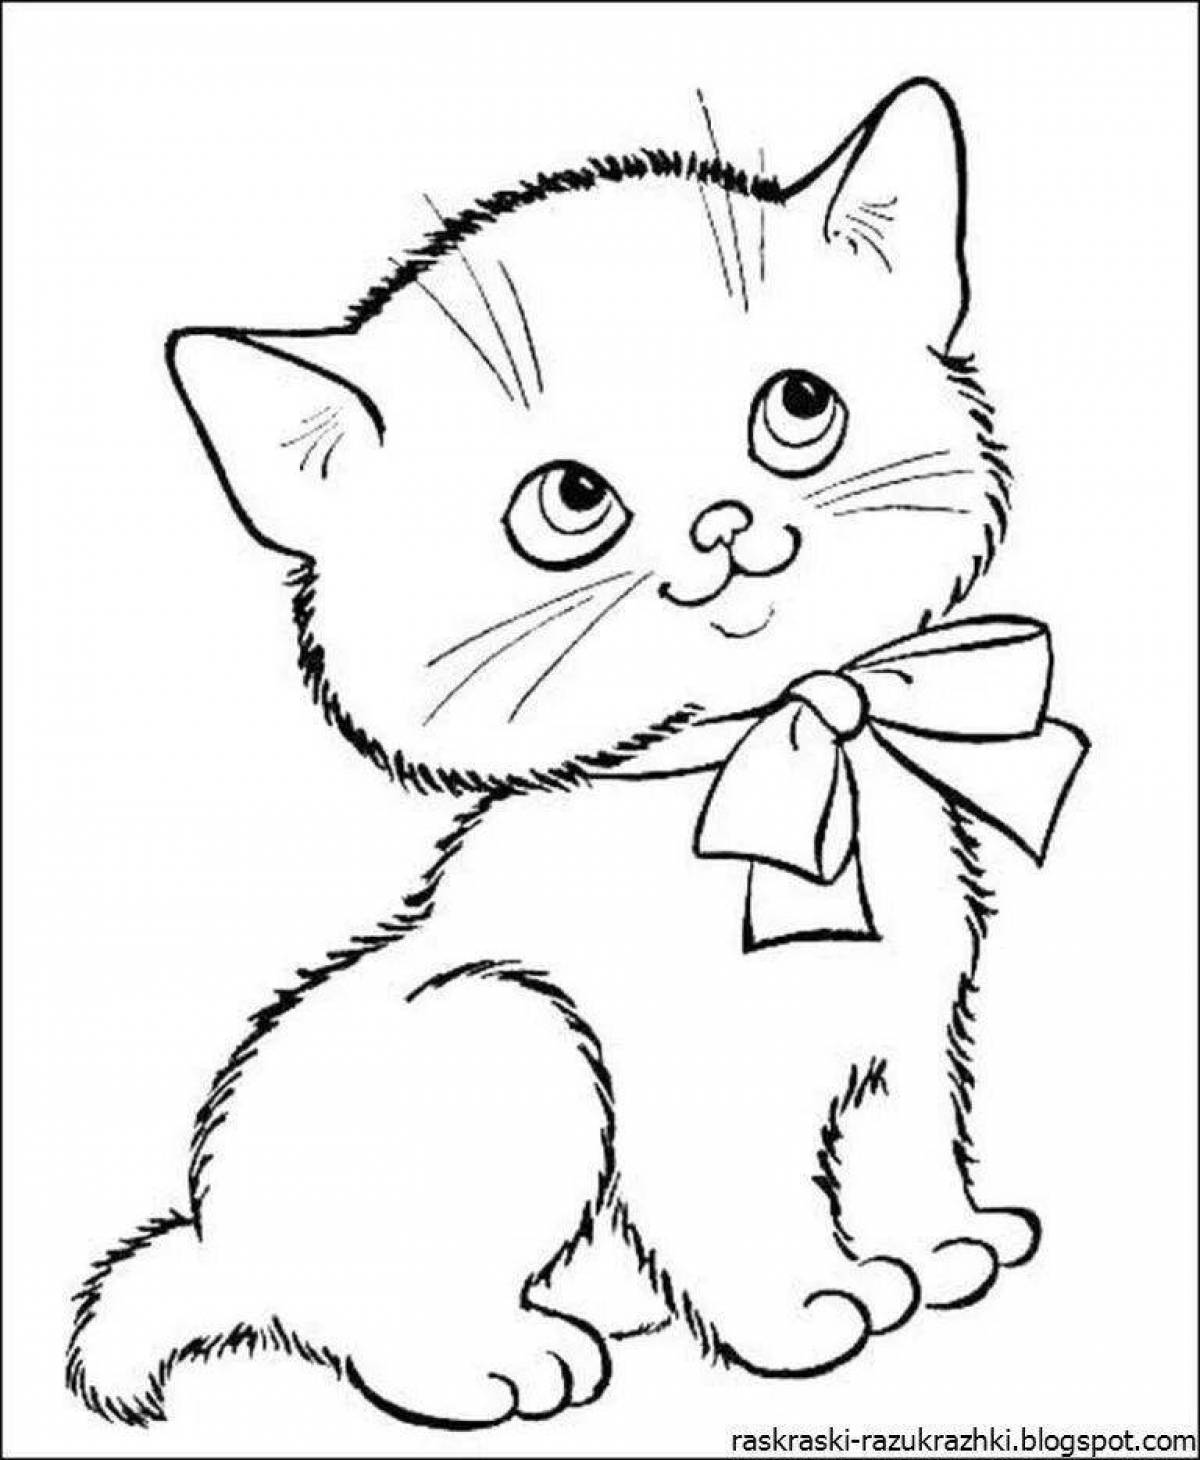 Funny kitten coloring book for kids 3-4 years old